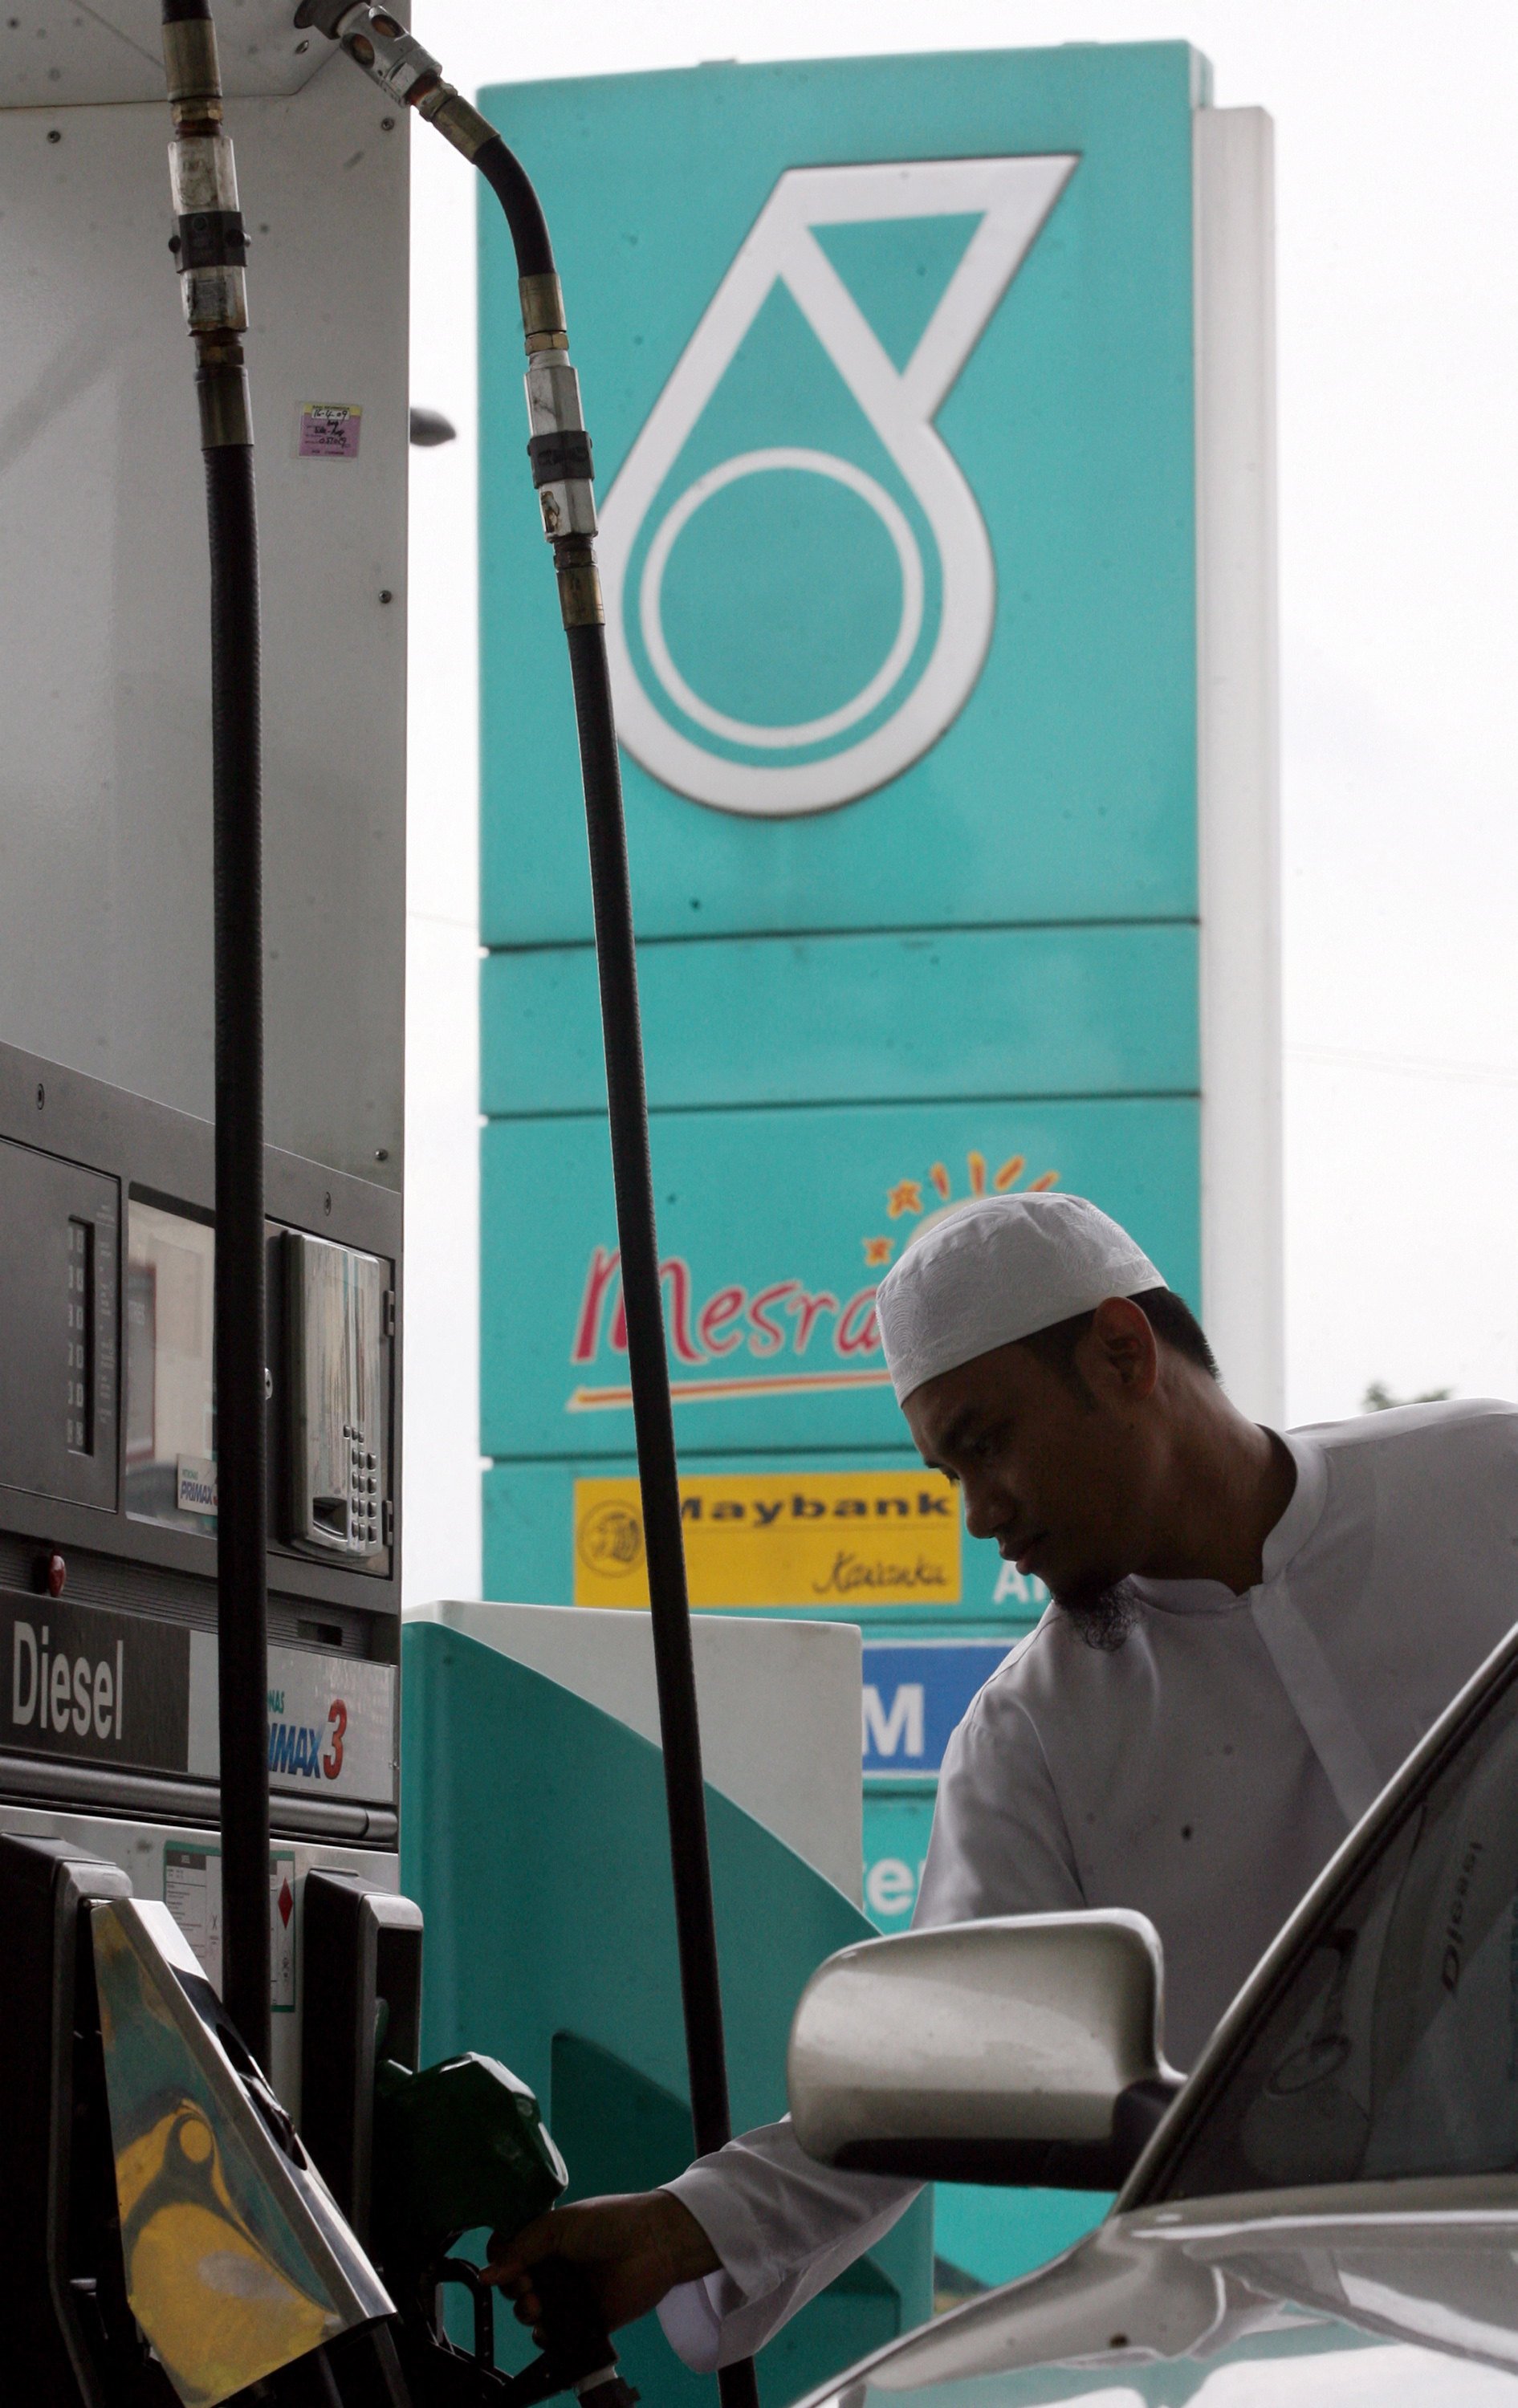 A man fills his car with fuel in Kuala Lumpur. Malaysian Prime Minister Anwar Ibrahim has said the diesel subsidy cut was aimed at the “uber rich and foreigners”. Photo: AFP